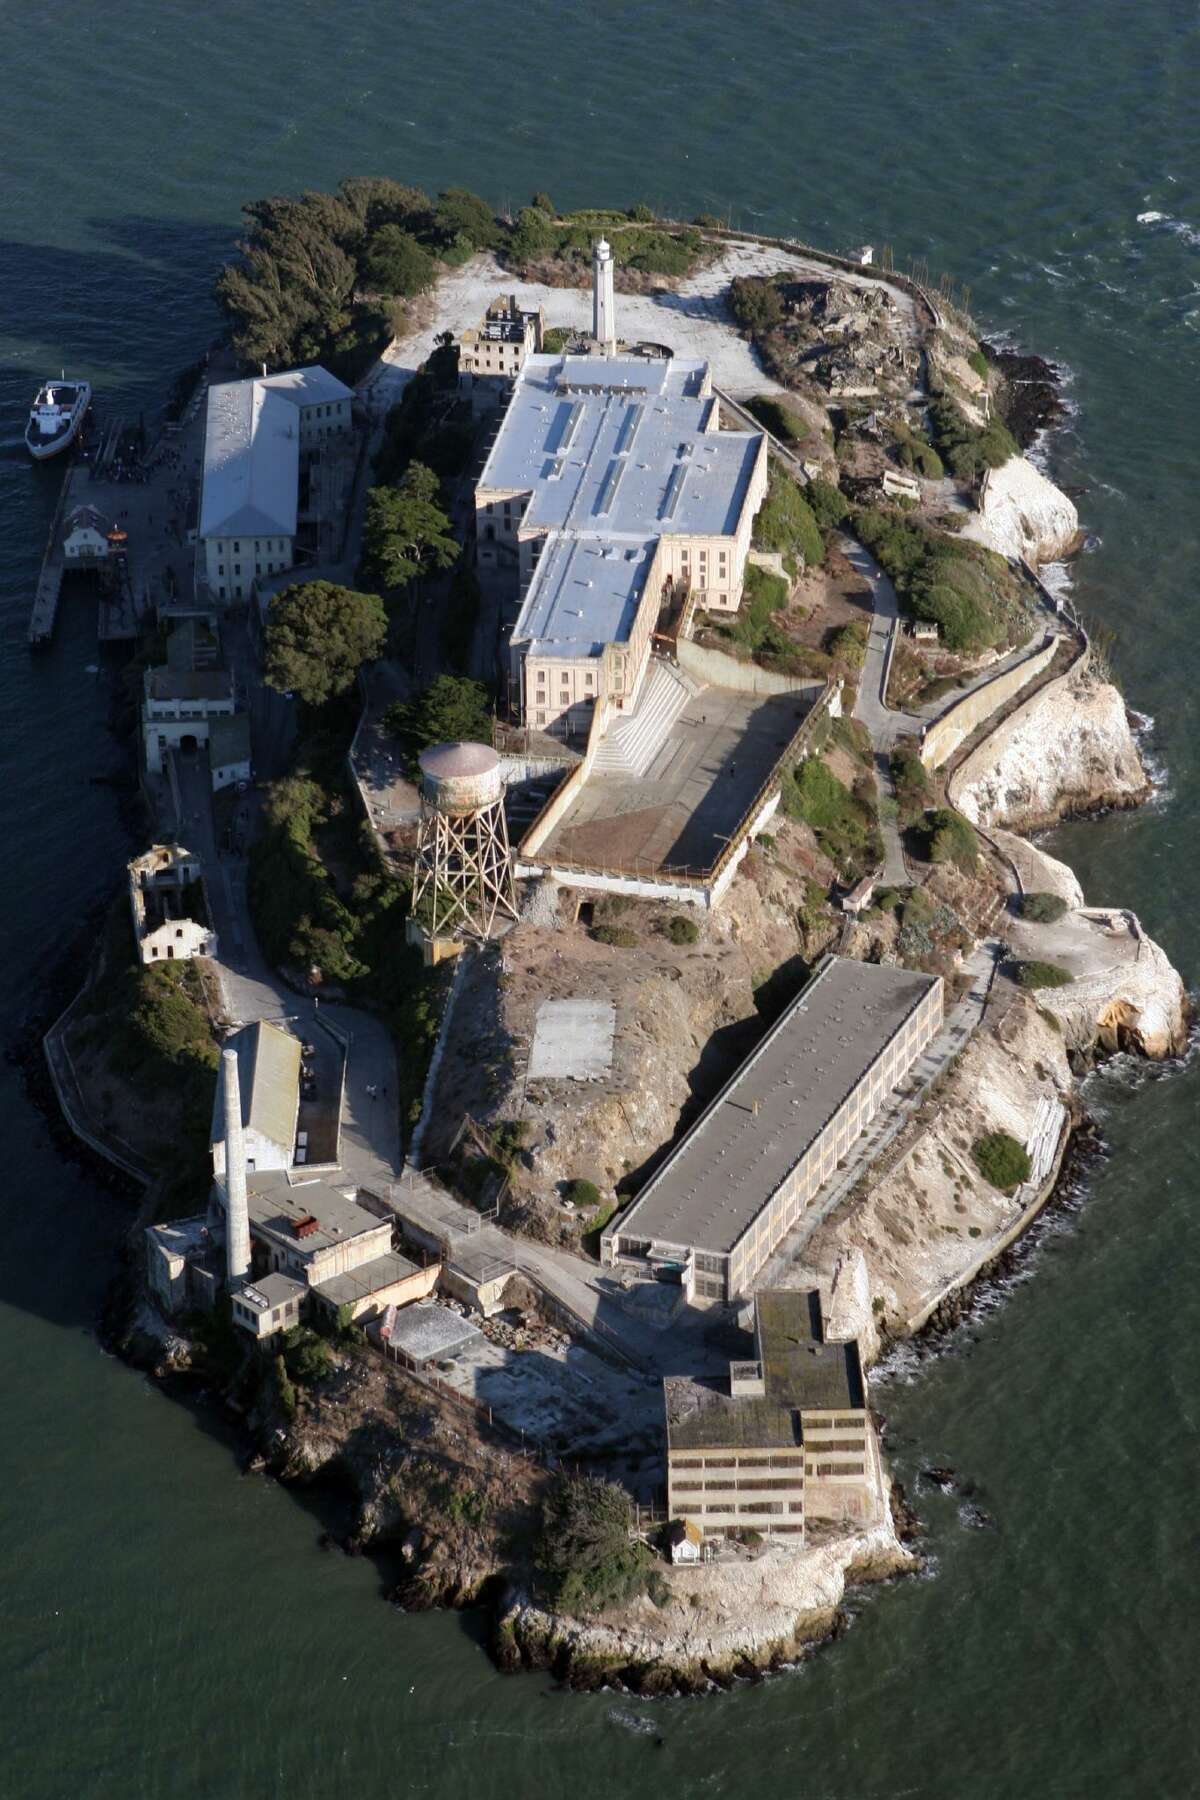 A&M's Alcatraz research continues to reveal underground forts, tunnels